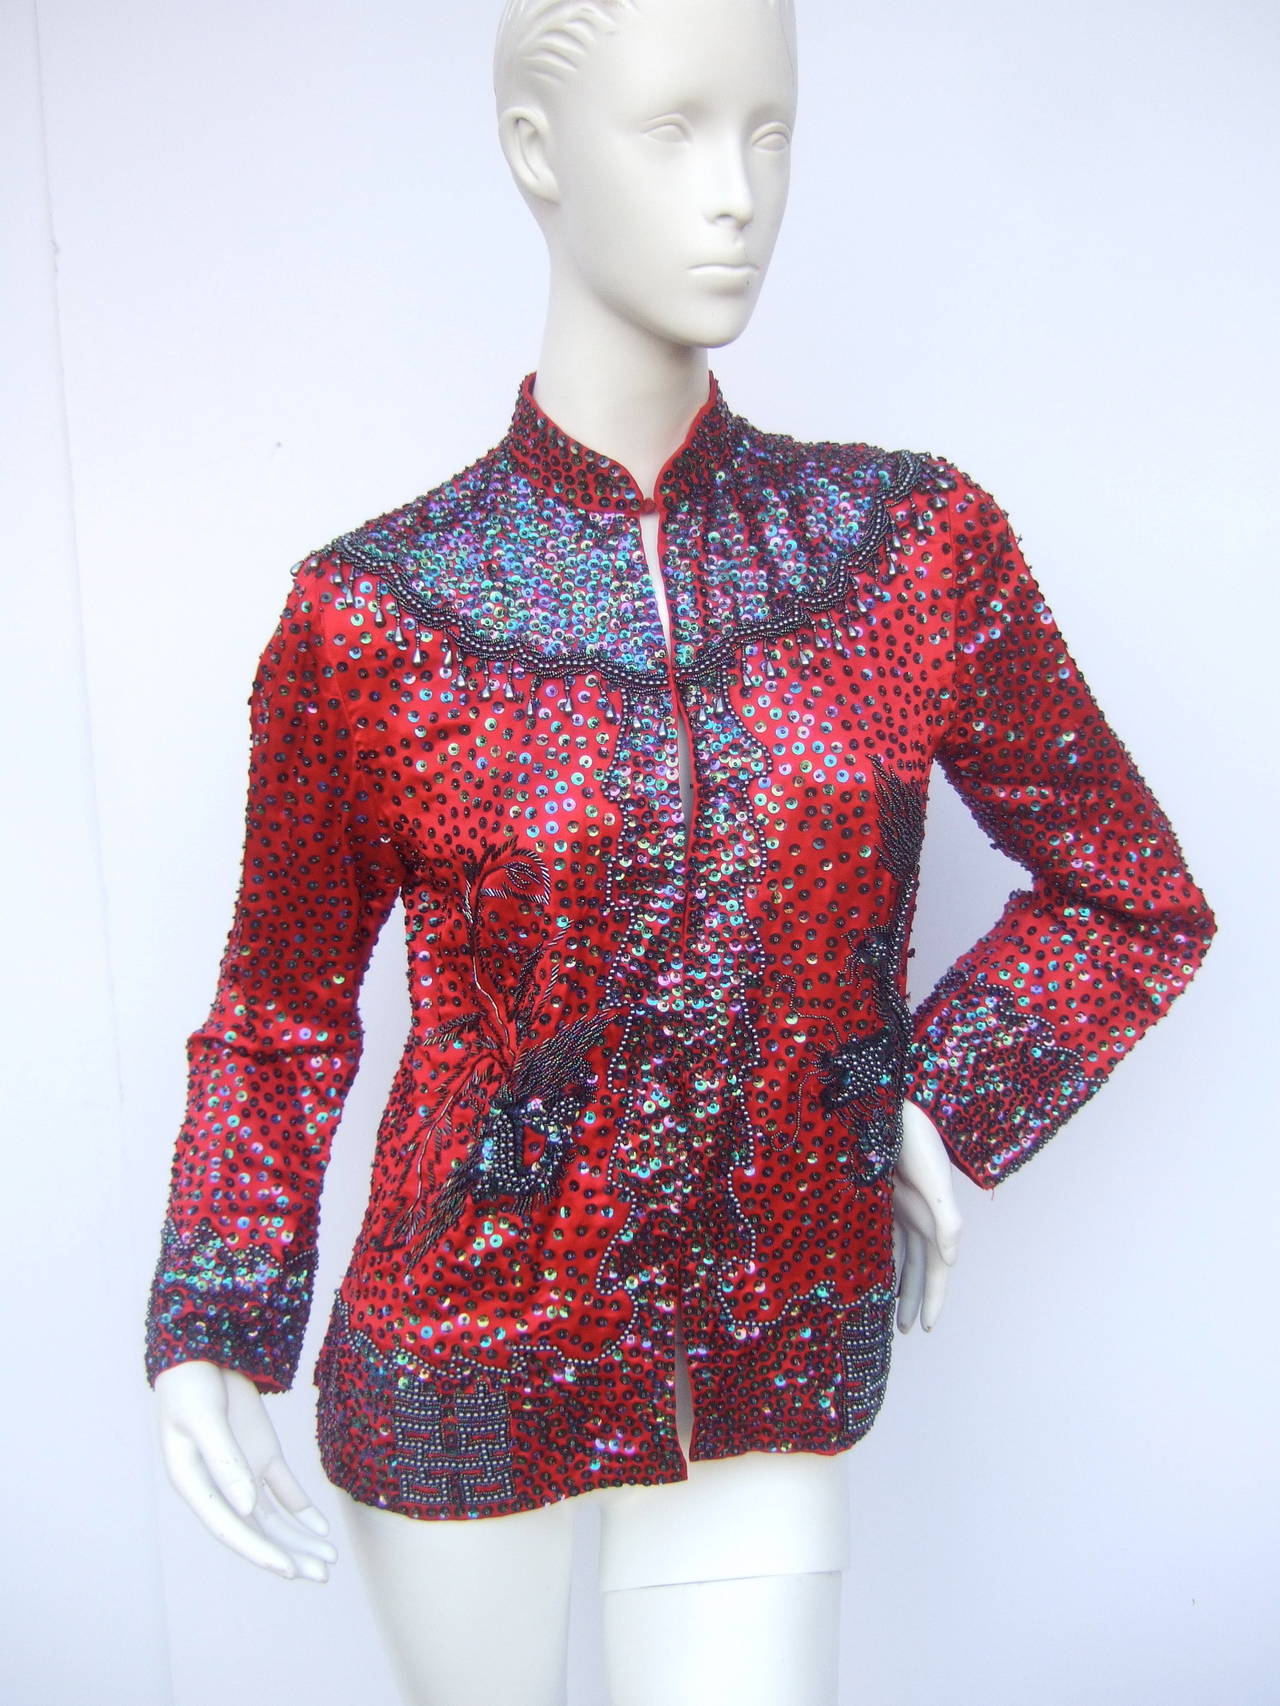 Exotic silk beaded & sequined crimson evening jacket c 1980
The exquisite hand beaded silk jacket is designed with elaborate 
sequined & beaded embellishments 

The yolk, borders & cuffs are encrusted with iridescent sequins
combined with